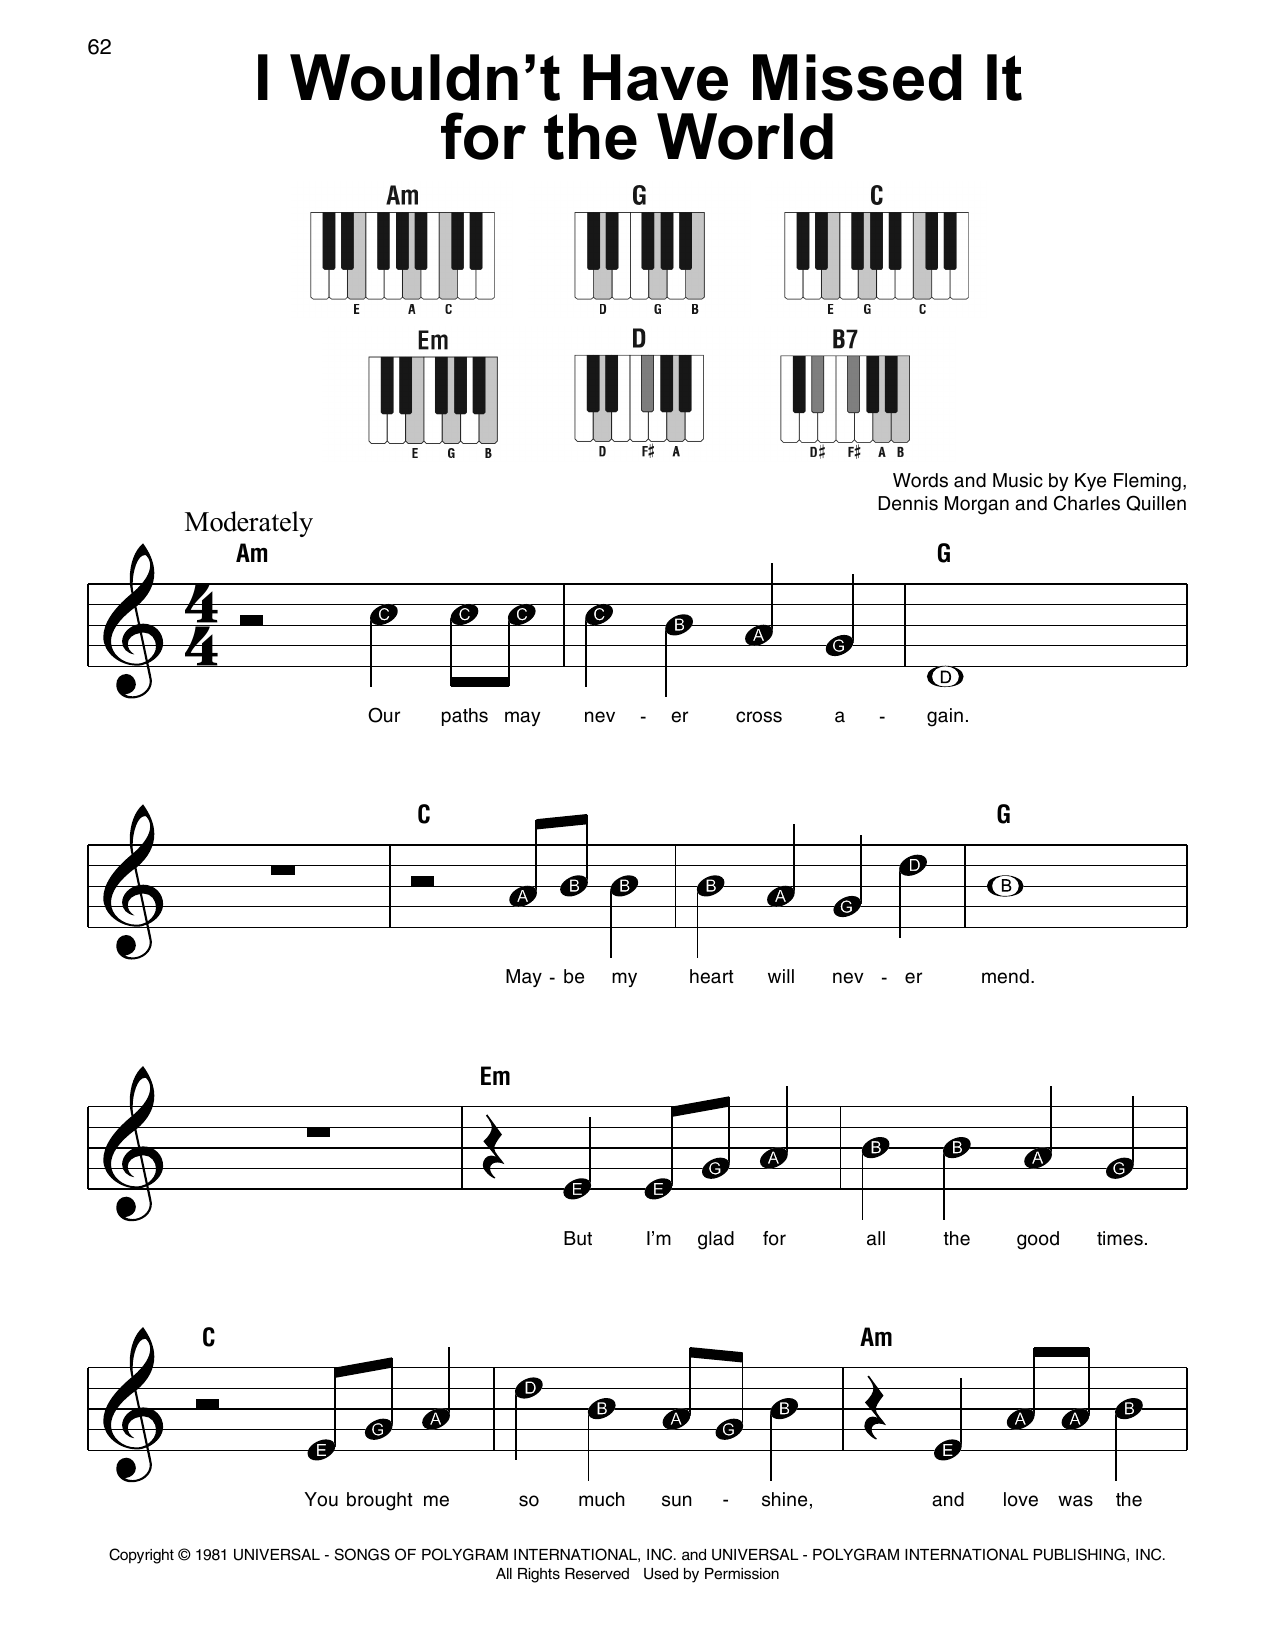 Download Ronnie Milsap I Wouldn't Have Missed It For The World Sheet Music